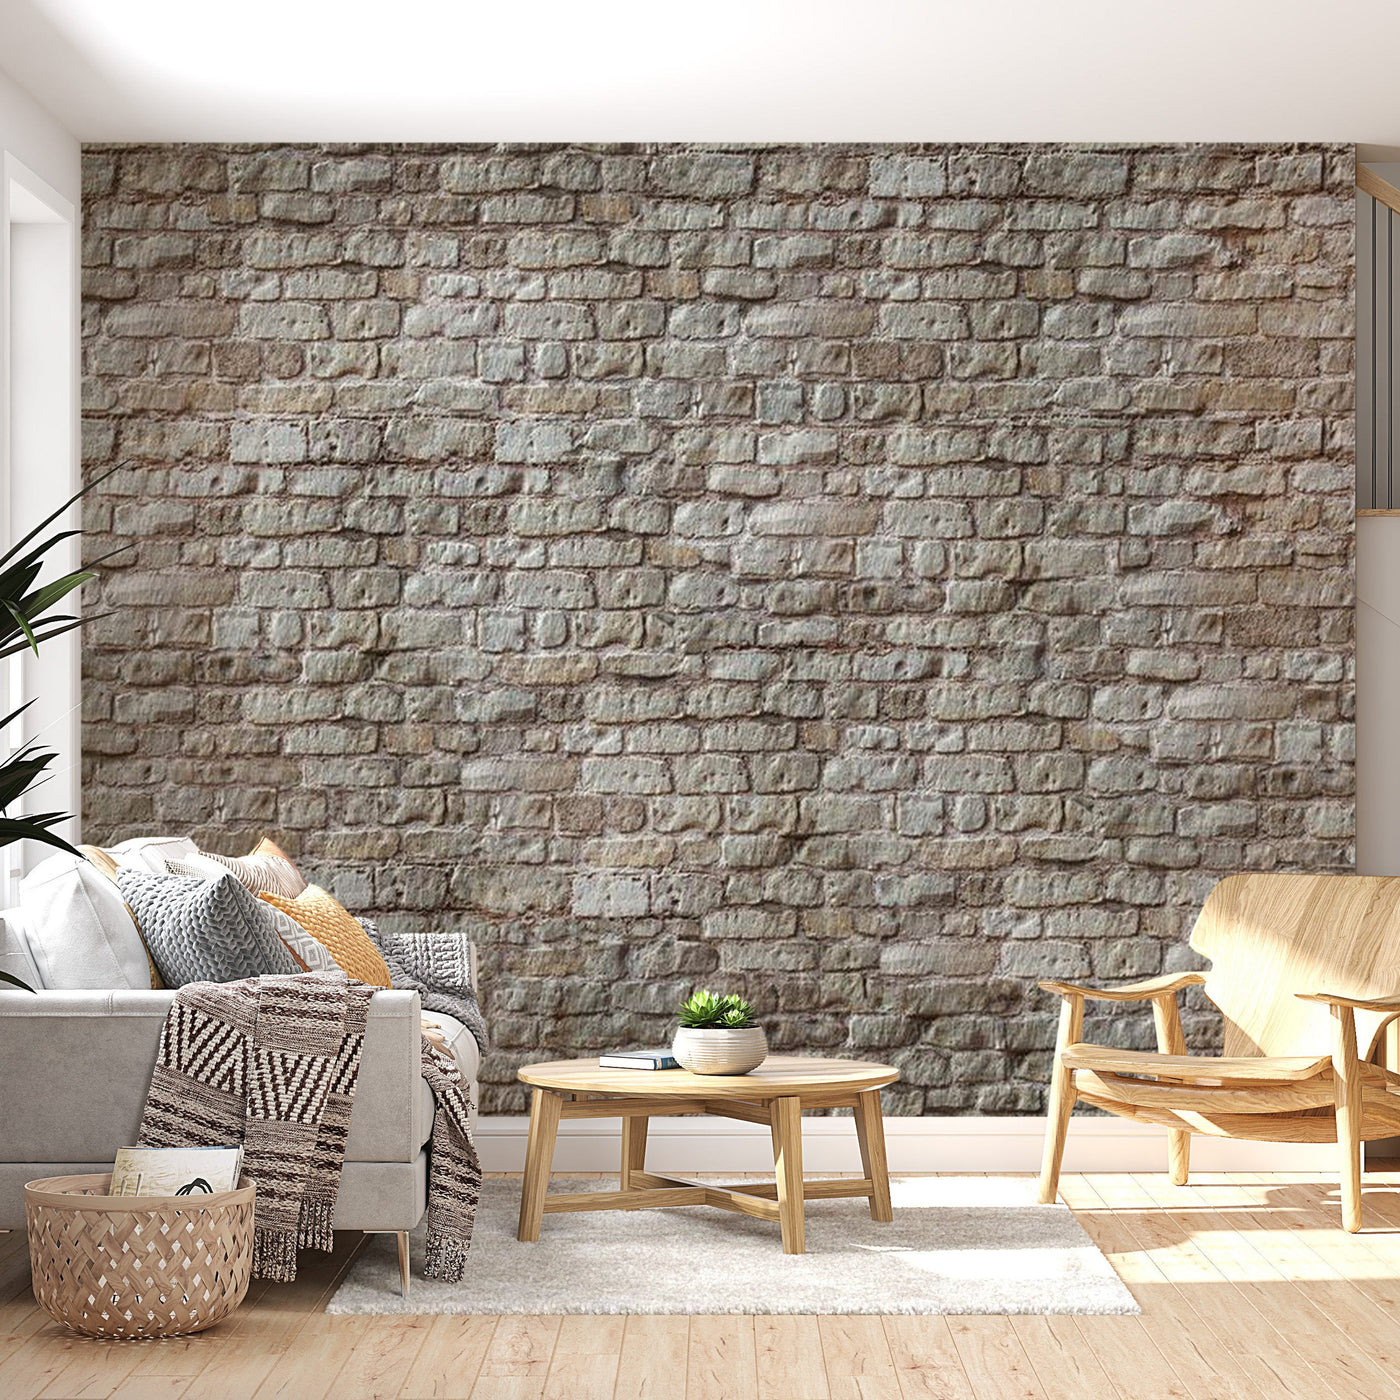 Peel & Stick Wall Mural - Grey Old Brick Wall - Removable Wall Decals